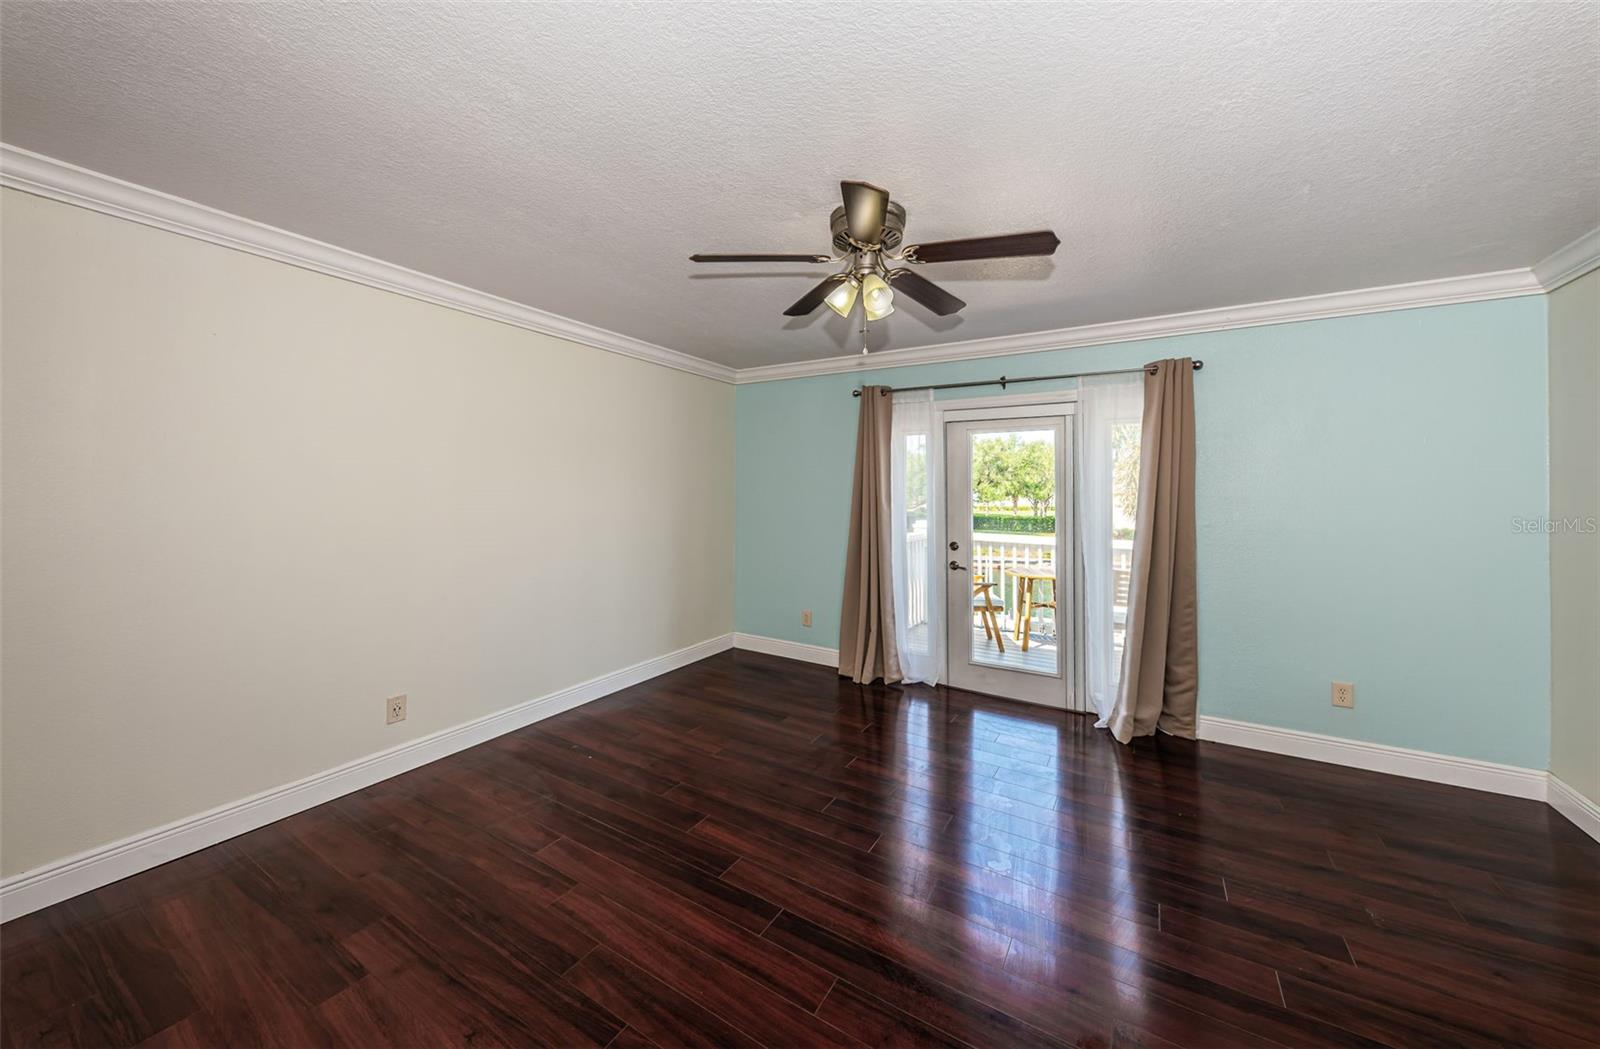 Large primary bedroom, to your right  from landing at top of stairs